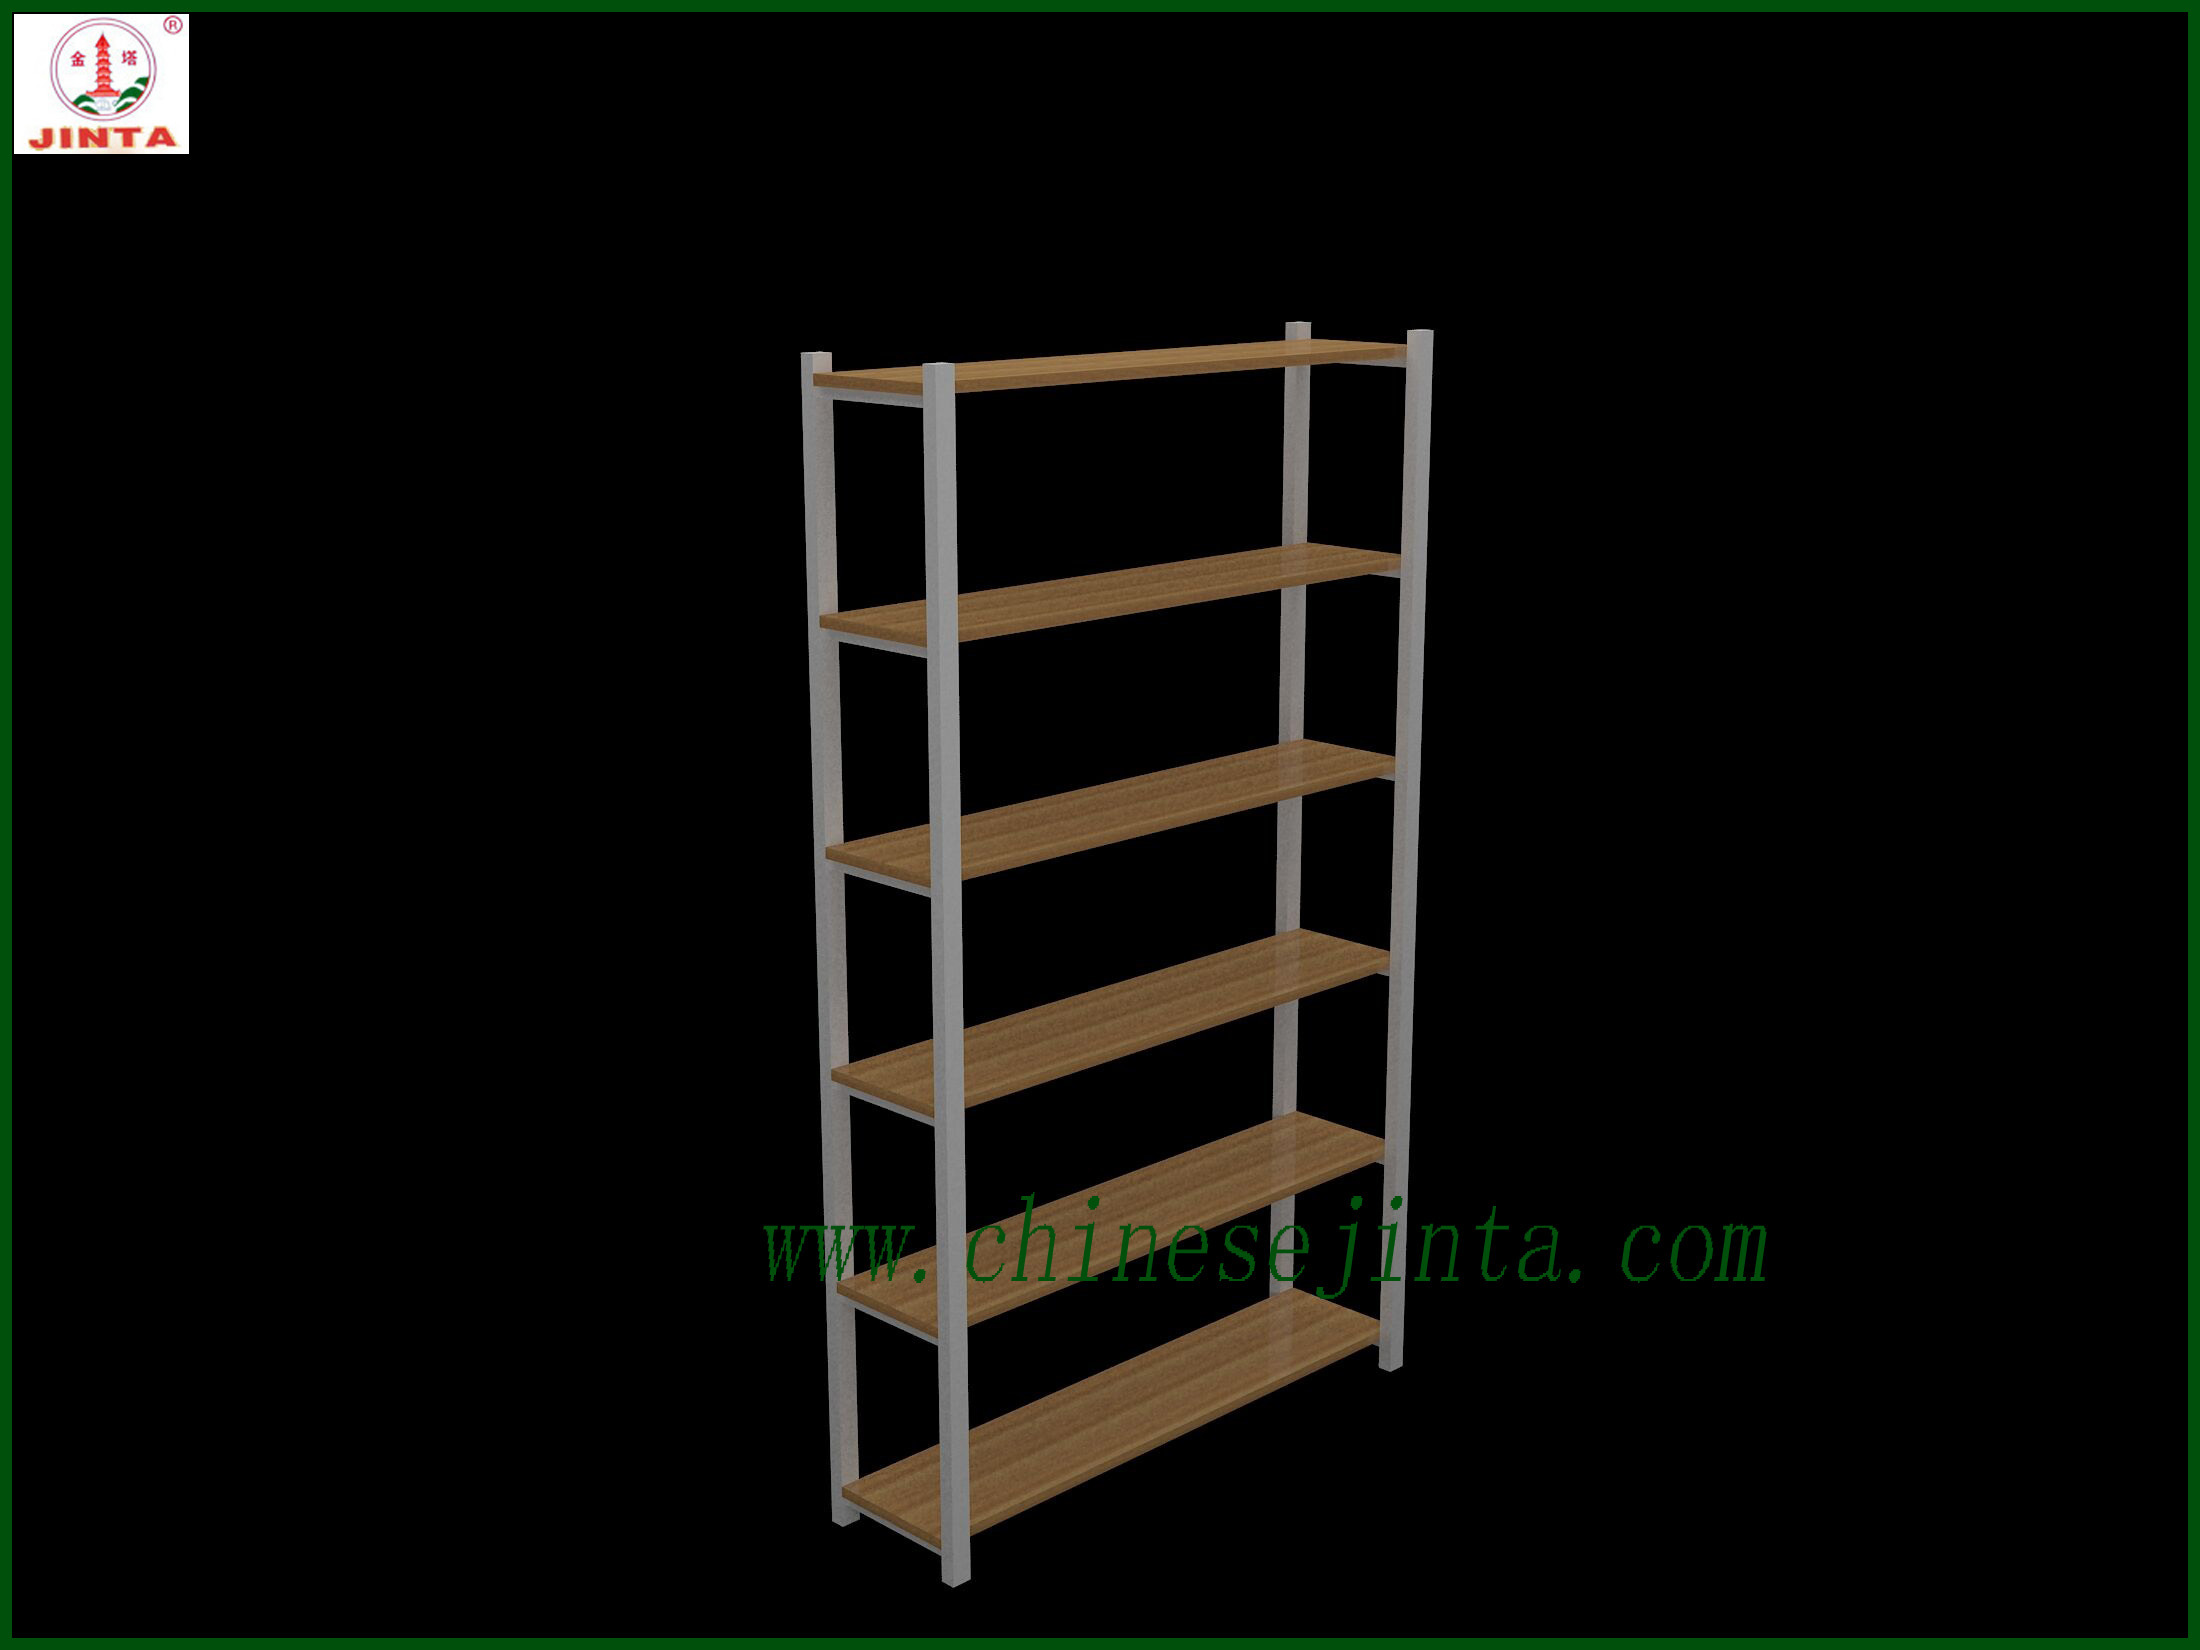 Wooden Shelving Used in Chain Stores (JT-A30)